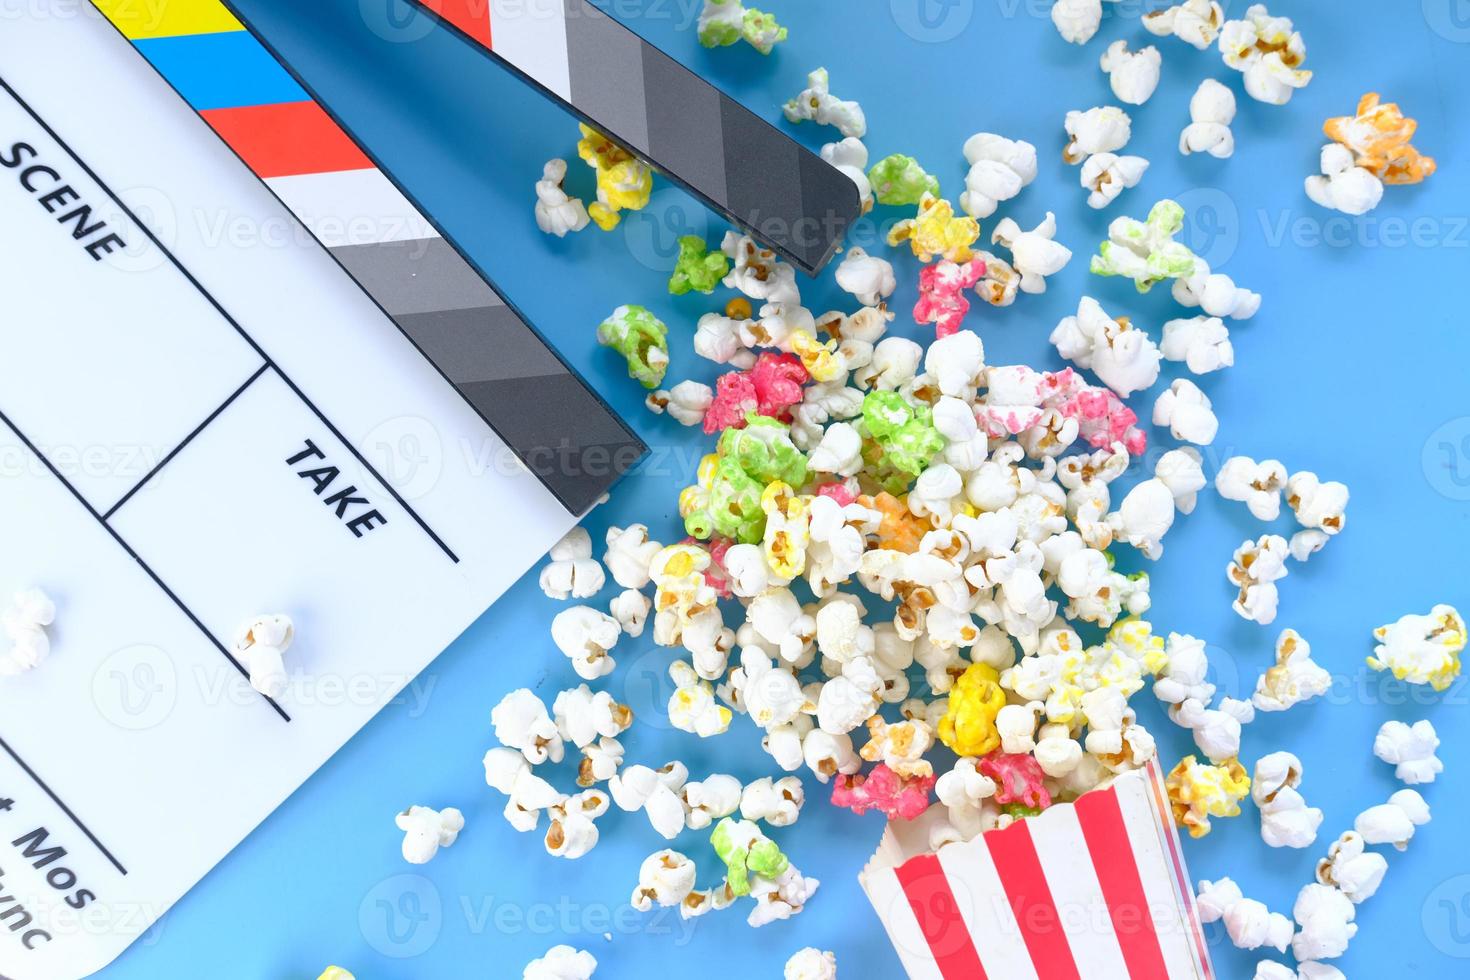 Movie clapper board and popcorn on blue background photo